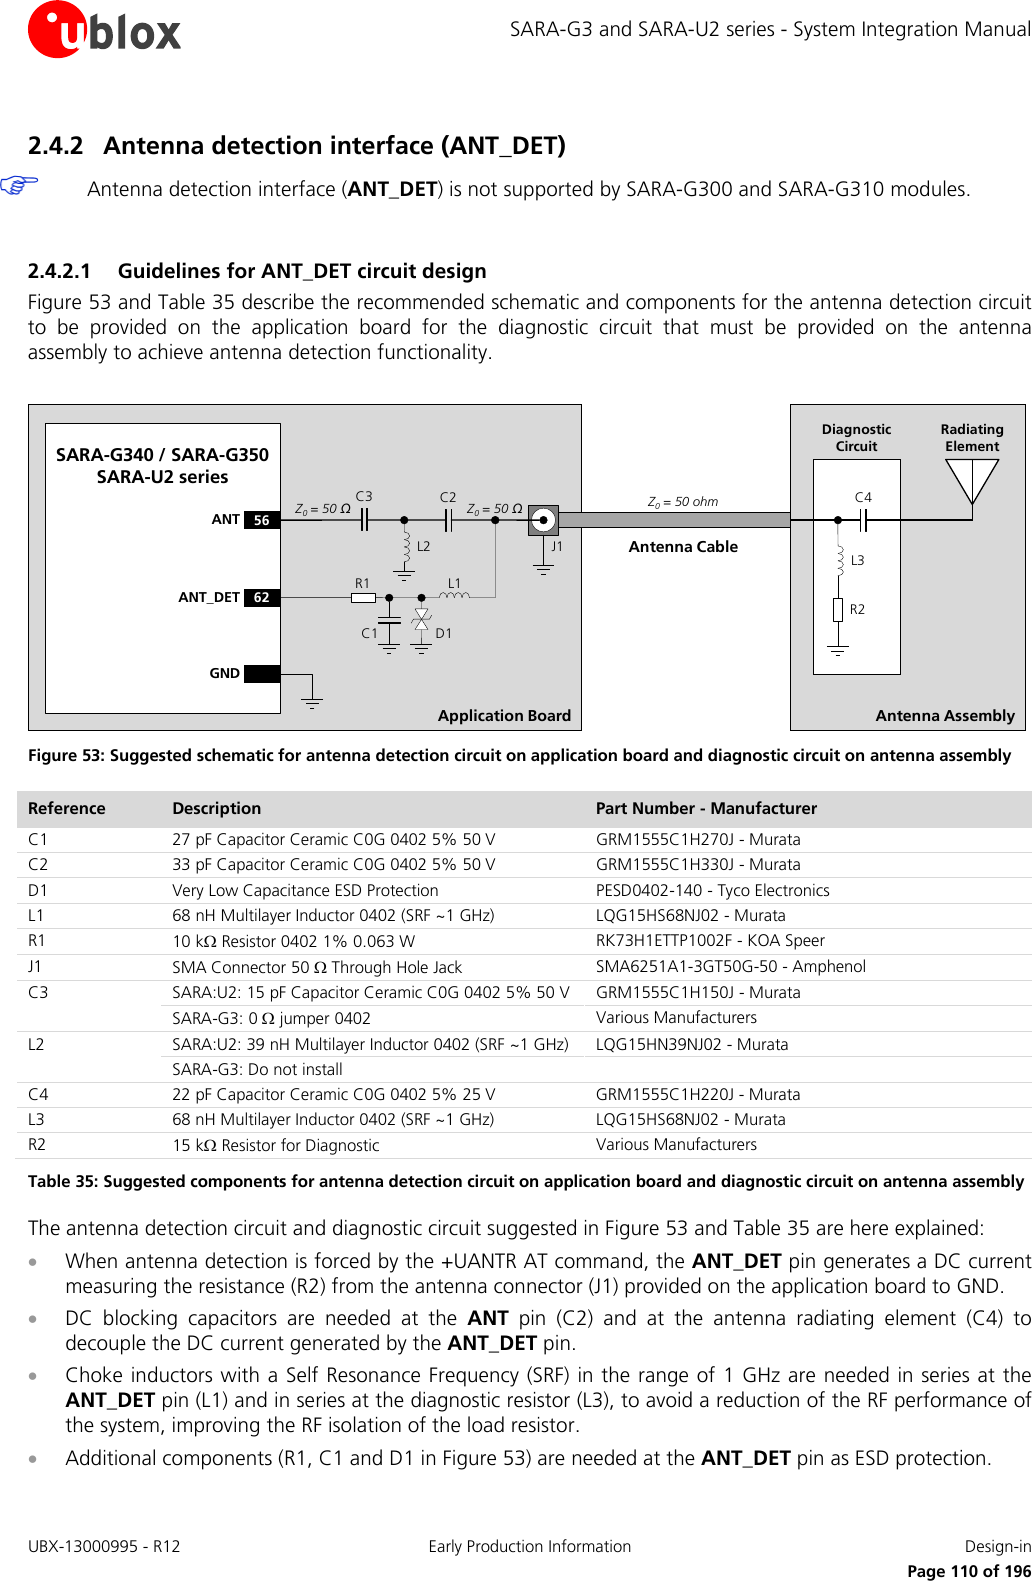 SARA-G3 and SARA-U2 series - System Integration Manual 2.4.2 Antenna detection interface (ANT_DET)  Antenna detection interface (ANT_DET) is not supported by SARA-G300 and SARA-G310 modules.  2.4.2.1 Guidelines for ANT_DET circuit design Figure 53 and Table 35 describe the recommended schematic and components for the antenna detection circuit to be provided on the application board for the diagnostic circuit that must be provided on the antenna assembly to achieve antenna detection functionality.  Application BoardAntenna CableSARA-G340 / SARA-G350 SARA-U2 series56ANT62ANT_DETR1C1 D1L1C2J1Z0= 50 ΩZ0= 50 ΩZ0= 50 ohmAntenna AssemblyR2C4L3Radiating ElementDiagnostic CircuitGNDL2C3 Figure 53: Suggested schematic for antenna detection circuit on application board and diagnostic circuit on antenna assembly Reference Description Part Number - Manufacturer C1 27 pF Capacitor Ceramic C0G 0402 5% 50 V GRM1555C1H270J - Murata C2 33 pF Capacitor Ceramic C0G 0402 5% 50 V GRM1555C1H330J - Murata D1 Very Low Capacitance ESD Protection PESD0402-140 - Tyco Electronics L1 68 nH Multilayer Inductor 0402 (SRF ~1 GHz) LQG15HS68NJ02 - Murata R1 10 kΩ Resistor 0402 1% 0.063 W RK73H1ETTP1002F - KOA Speer J1 SMA Connector 50 Ω Through Hole Jack SMA6251A1-3GT50G-50 - Amphenol C3 SARA:U2: 15 pF Capacitor Ceramic C0G 0402 5% 50 V  GRM1555C1H150J - Murata  SARA-G3: 0 Ω jumper 0402 Various Manufacturers L2 SARA:U2: 39 nH Multilayer Inductor 0402 (SRF ~1 GHz) LQG15HN39NJ02 - Murata  SARA-G3: Do not install   C4 22 pF Capacitor Ceramic C0G 0402 5% 25 V  GRM1555C1H220J - Murata L3 68 nH Multilayer Inductor 0402 (SRF ~1 GHz) LQG15HS68NJ02 - Murata R2 15 kΩ Resistor for Diagnostic Various Manufacturers Table 35: Suggested components for antenna detection circuit on application board and diagnostic circuit on antenna assembly The antenna detection circuit and diagnostic circuit suggested in Figure 53 and Table 35 are here explained: • When antenna detection is forced by the +UANTR AT command, the ANT_DET pin generates a DC current measuring the resistance (R2) from the antenna connector (J1) provided on the application board to GND. • DC blocking capacitors are needed at the ANT pin  (C2)  and at the antenna radiating element (C4) to decouple the DC current generated by the ANT_DET pin. • Choke inductors with a Self Resonance Frequency (SRF) in the range of 1 GHz are needed in series at the ANT_DET pin (L1) and in series at the diagnostic resistor (L3), to avoid a reduction of the RF performance of the system, improving the RF isolation of the load resistor.  • Additional components (R1, C1 and D1 in Figure 53) are needed at the ANT_DET pin as ESD protection. UBX-13000995 - R12 Early Production Information Design-in     Page 110 of 196 